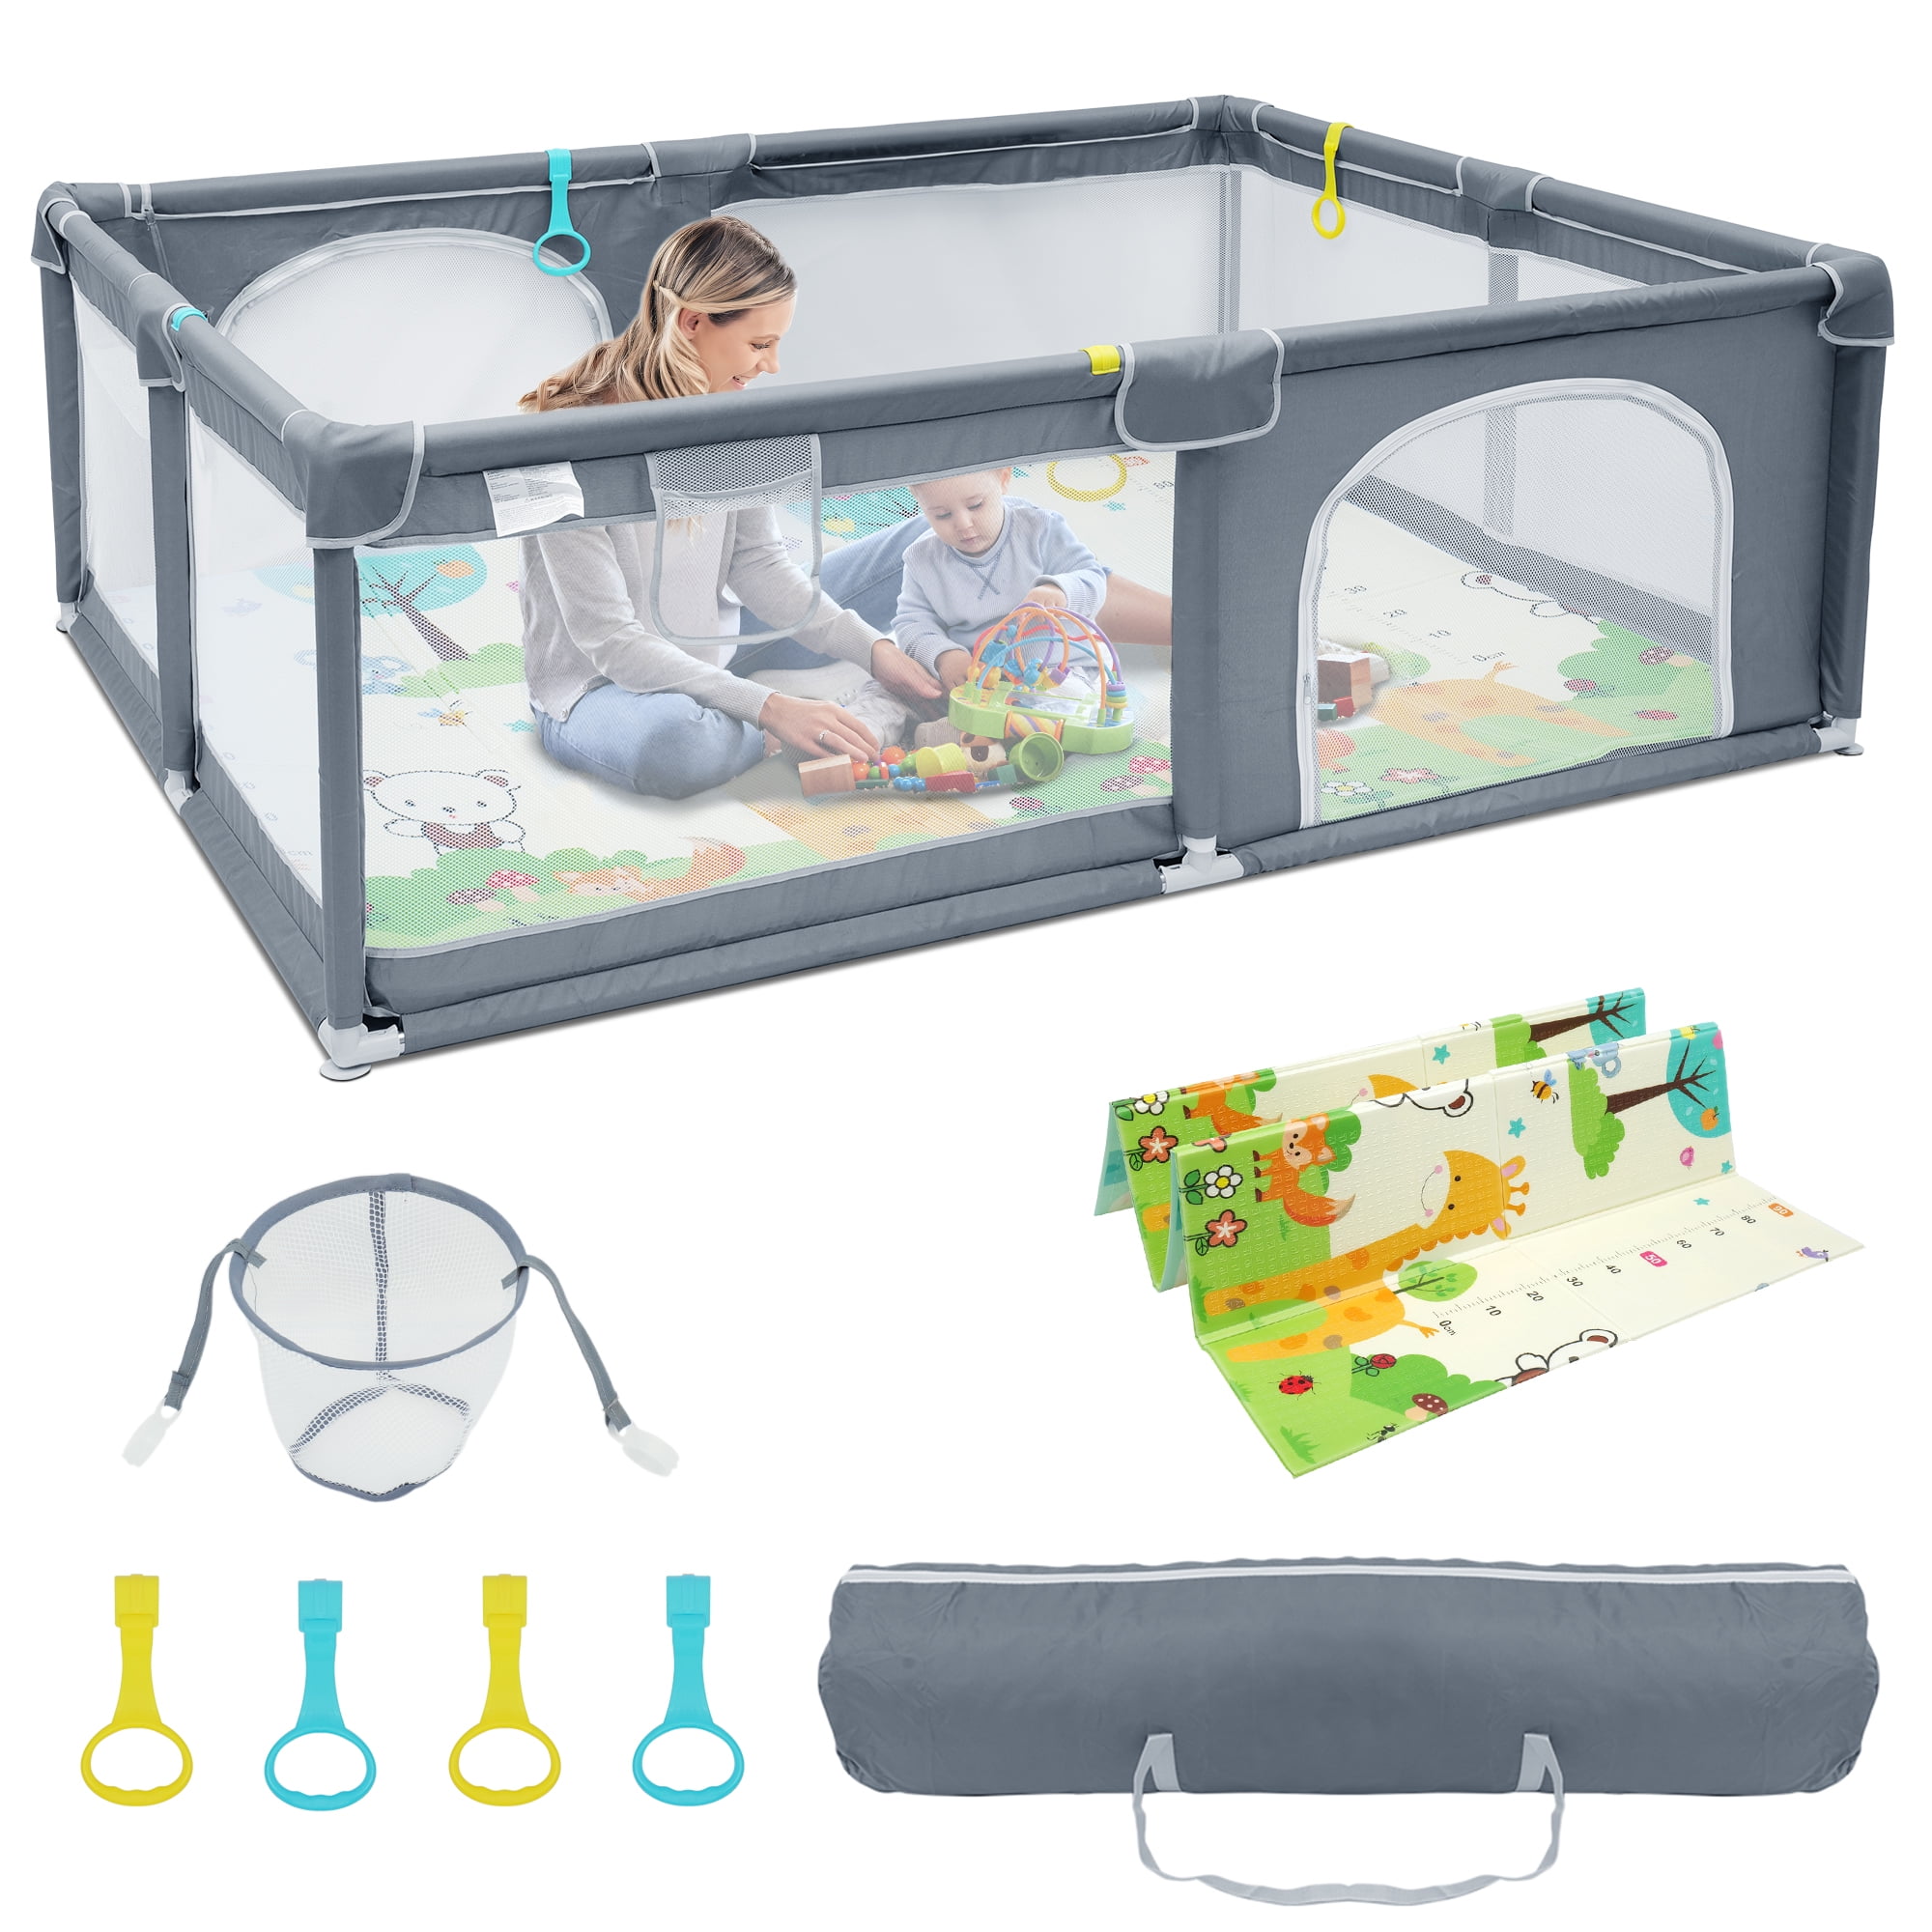 CAUTUM Large Baby Playpen for Toddler, Indoor & Outdoor, 78"x59"x26" with 0.4" Playmat Gray - image 1 of 9